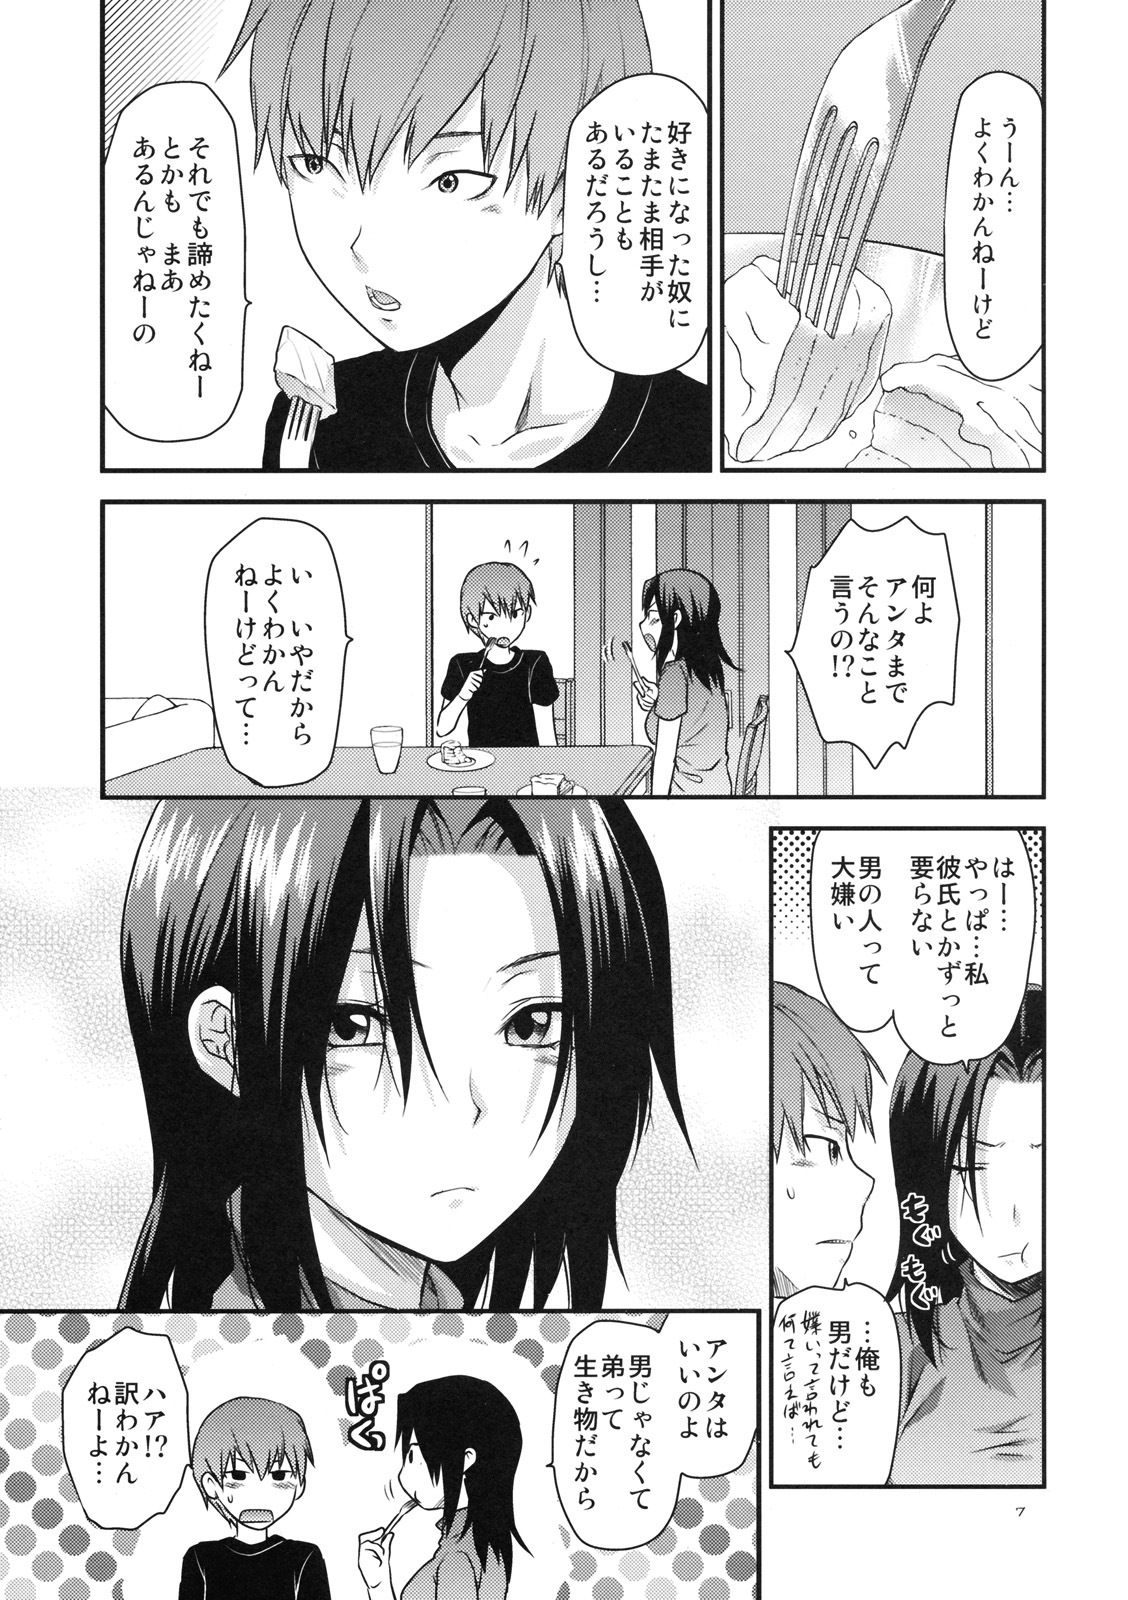 (SC49) [Lv.X+ (Yuzuki N Dash)] Another Another World page 6 full